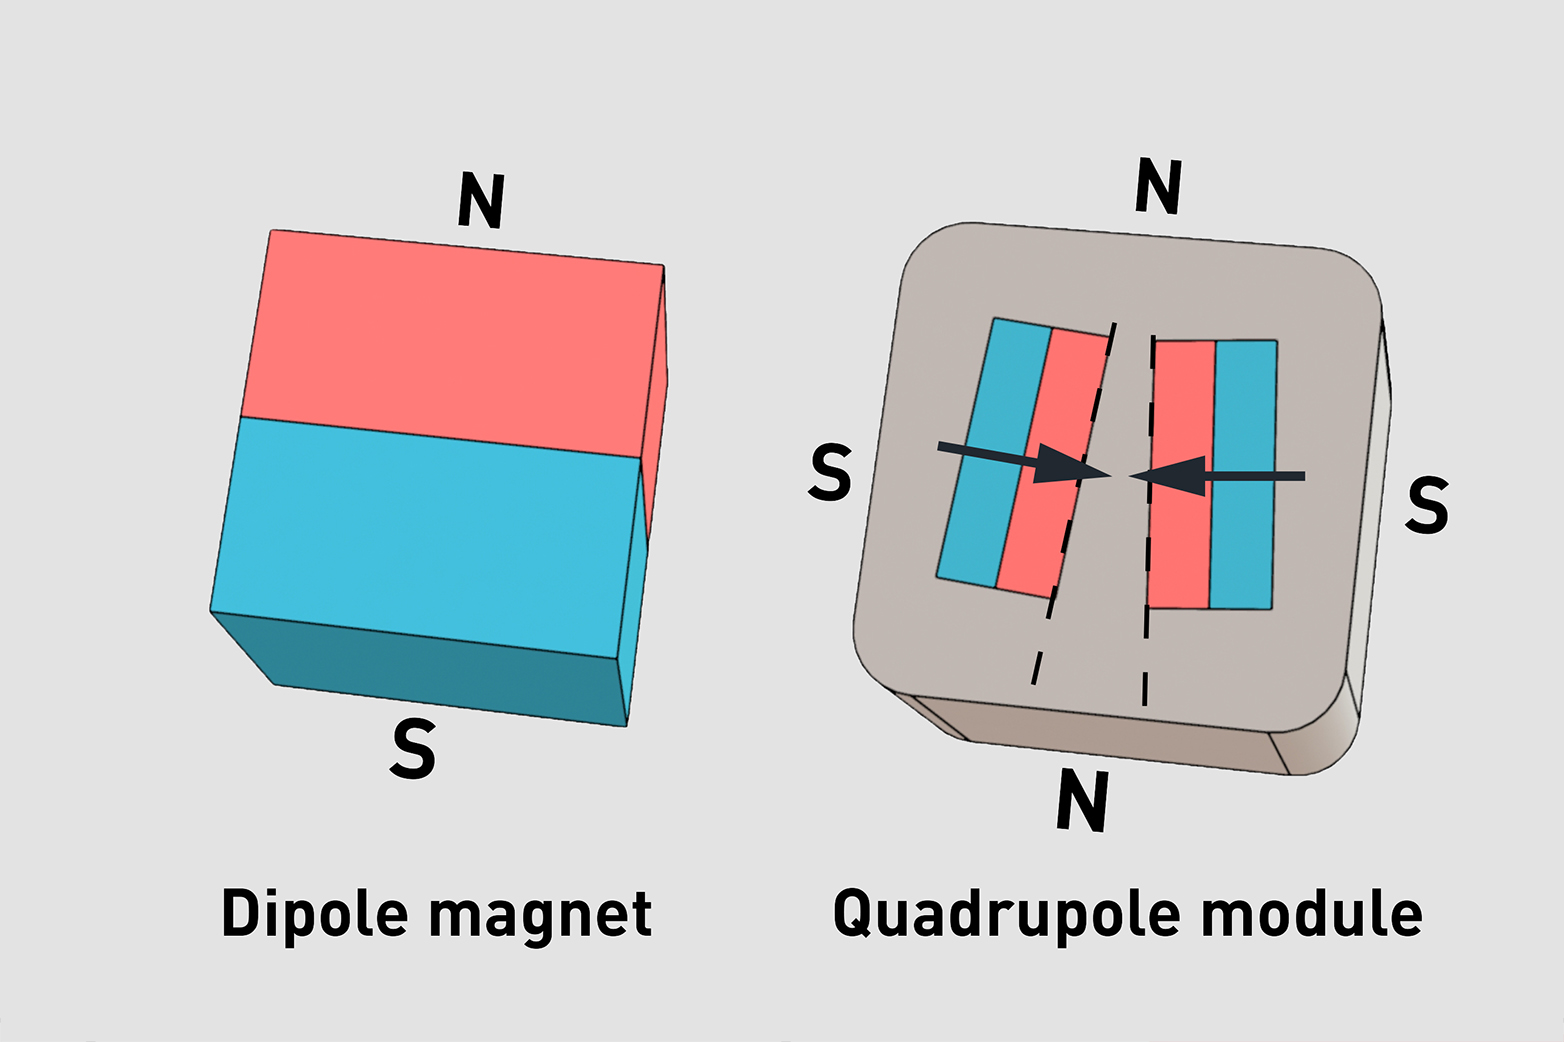 dipole magnet at left with its two poles. At right, two dipole magnets at angle within cube